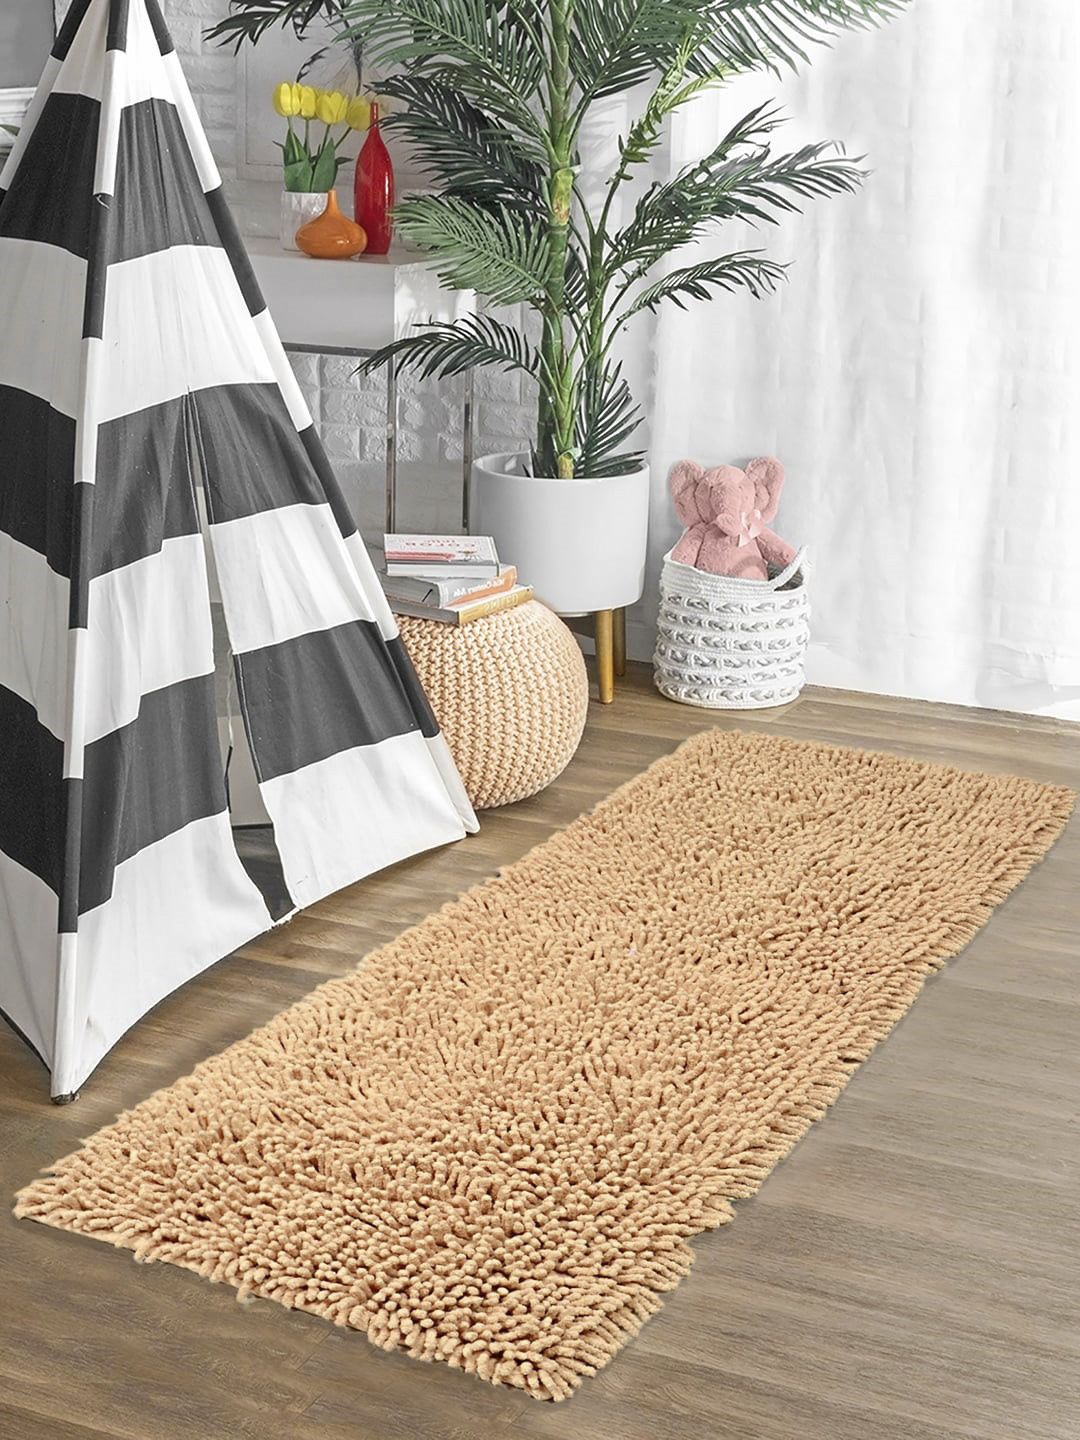 Saral Home Beige Solid Tufted Shaggy Anti-Skid Floor Runner Price in India